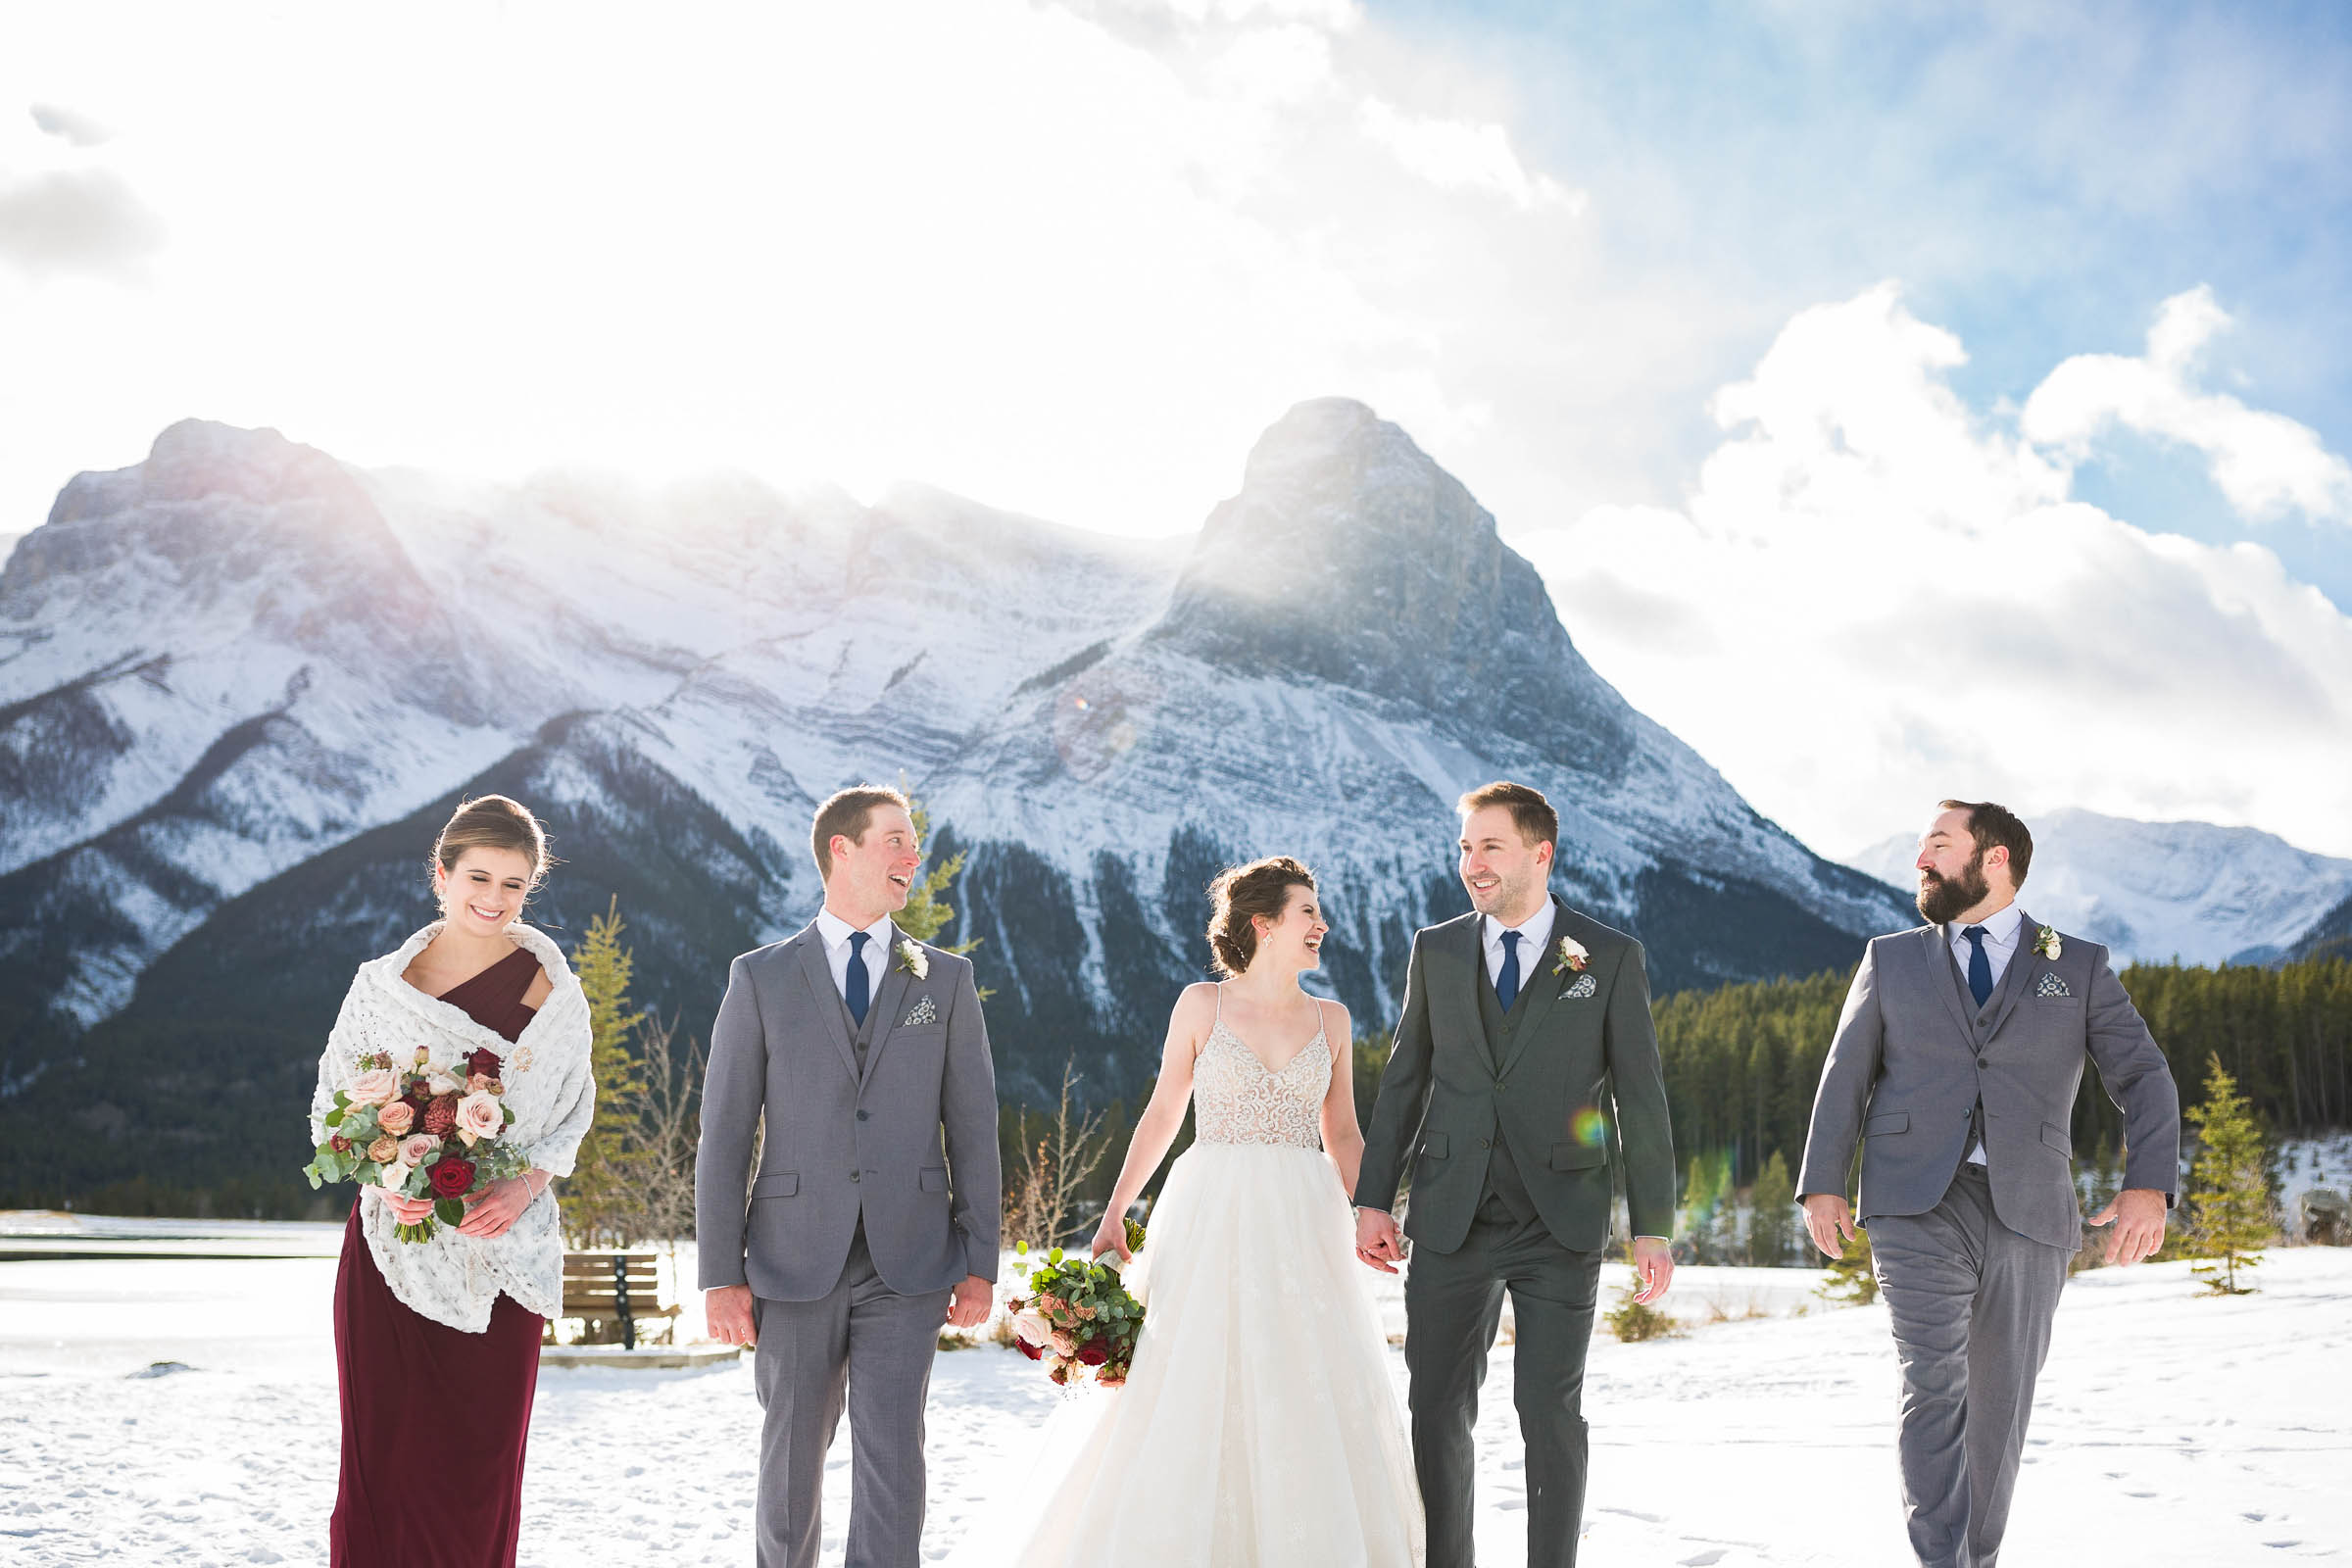 Happy wedding party walking in snow bank with Rocky Mountains in the back